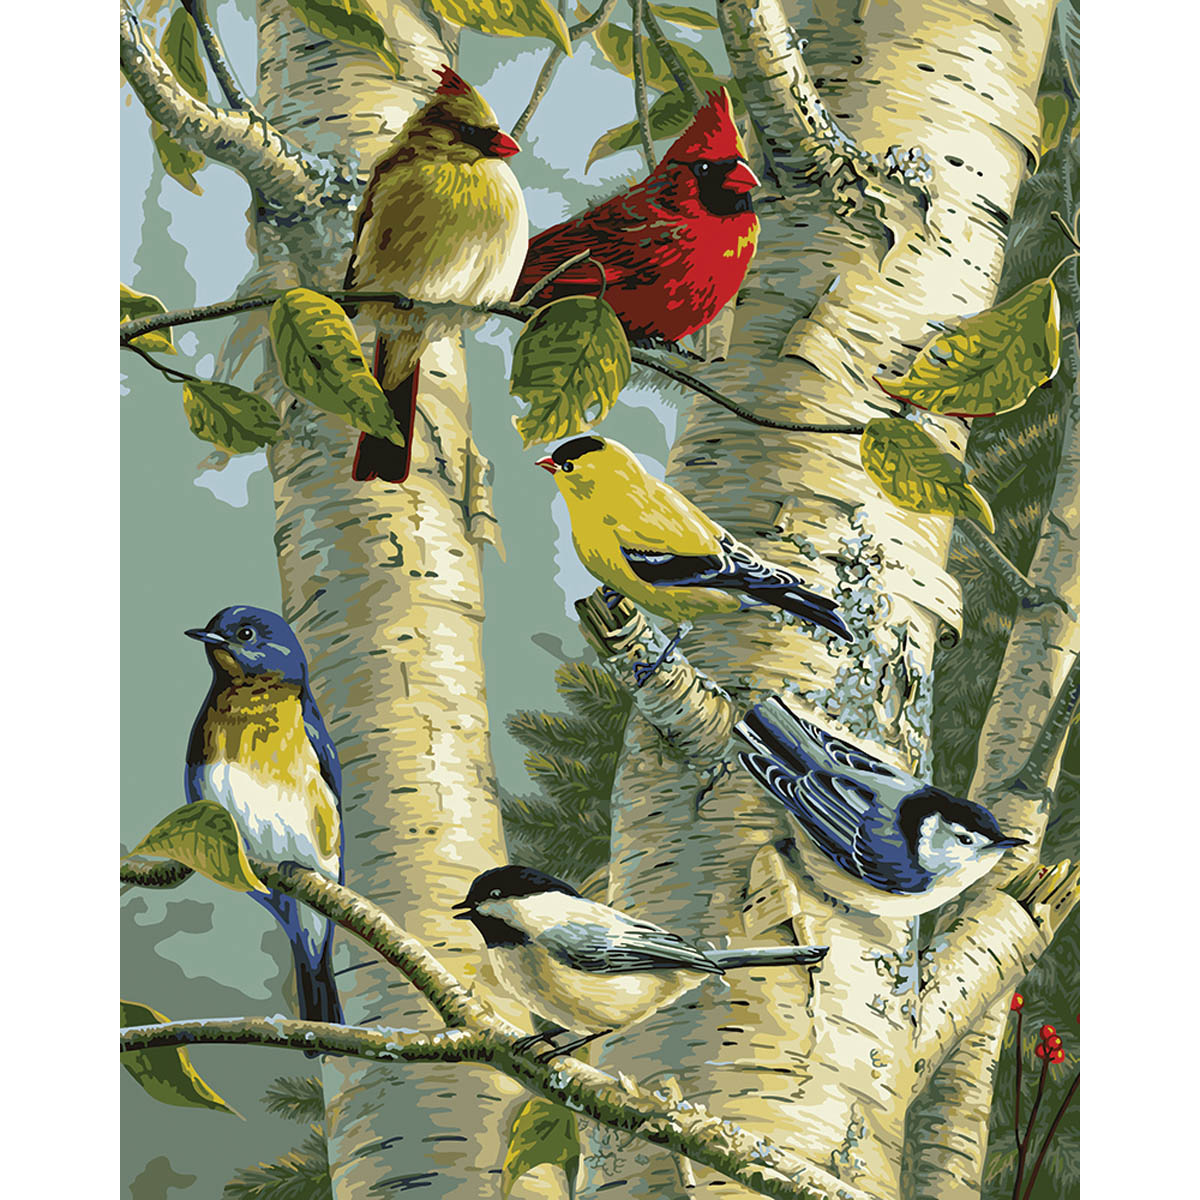 PAINT BY NUMBER - SONG BIRD FAVORITES 16X20